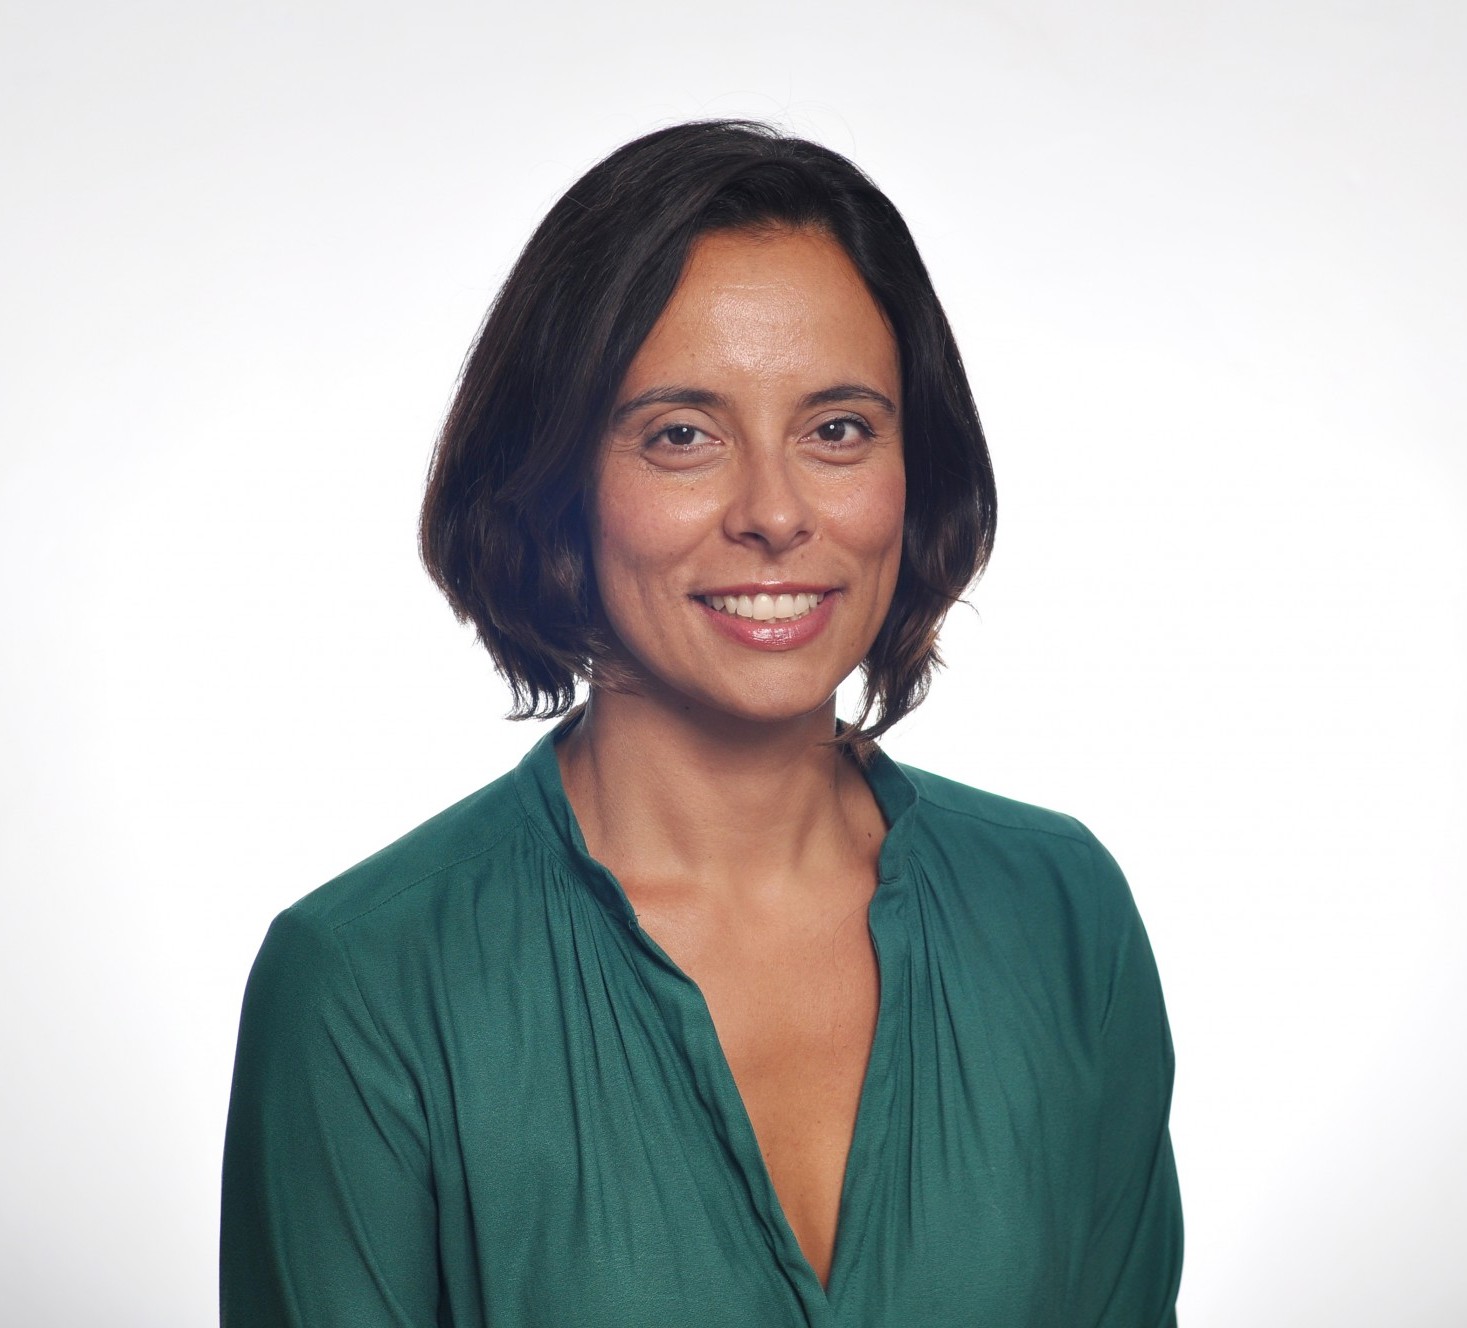 Joana is smiling against a white background. She has dark brown hair and is wearing a green shirt.